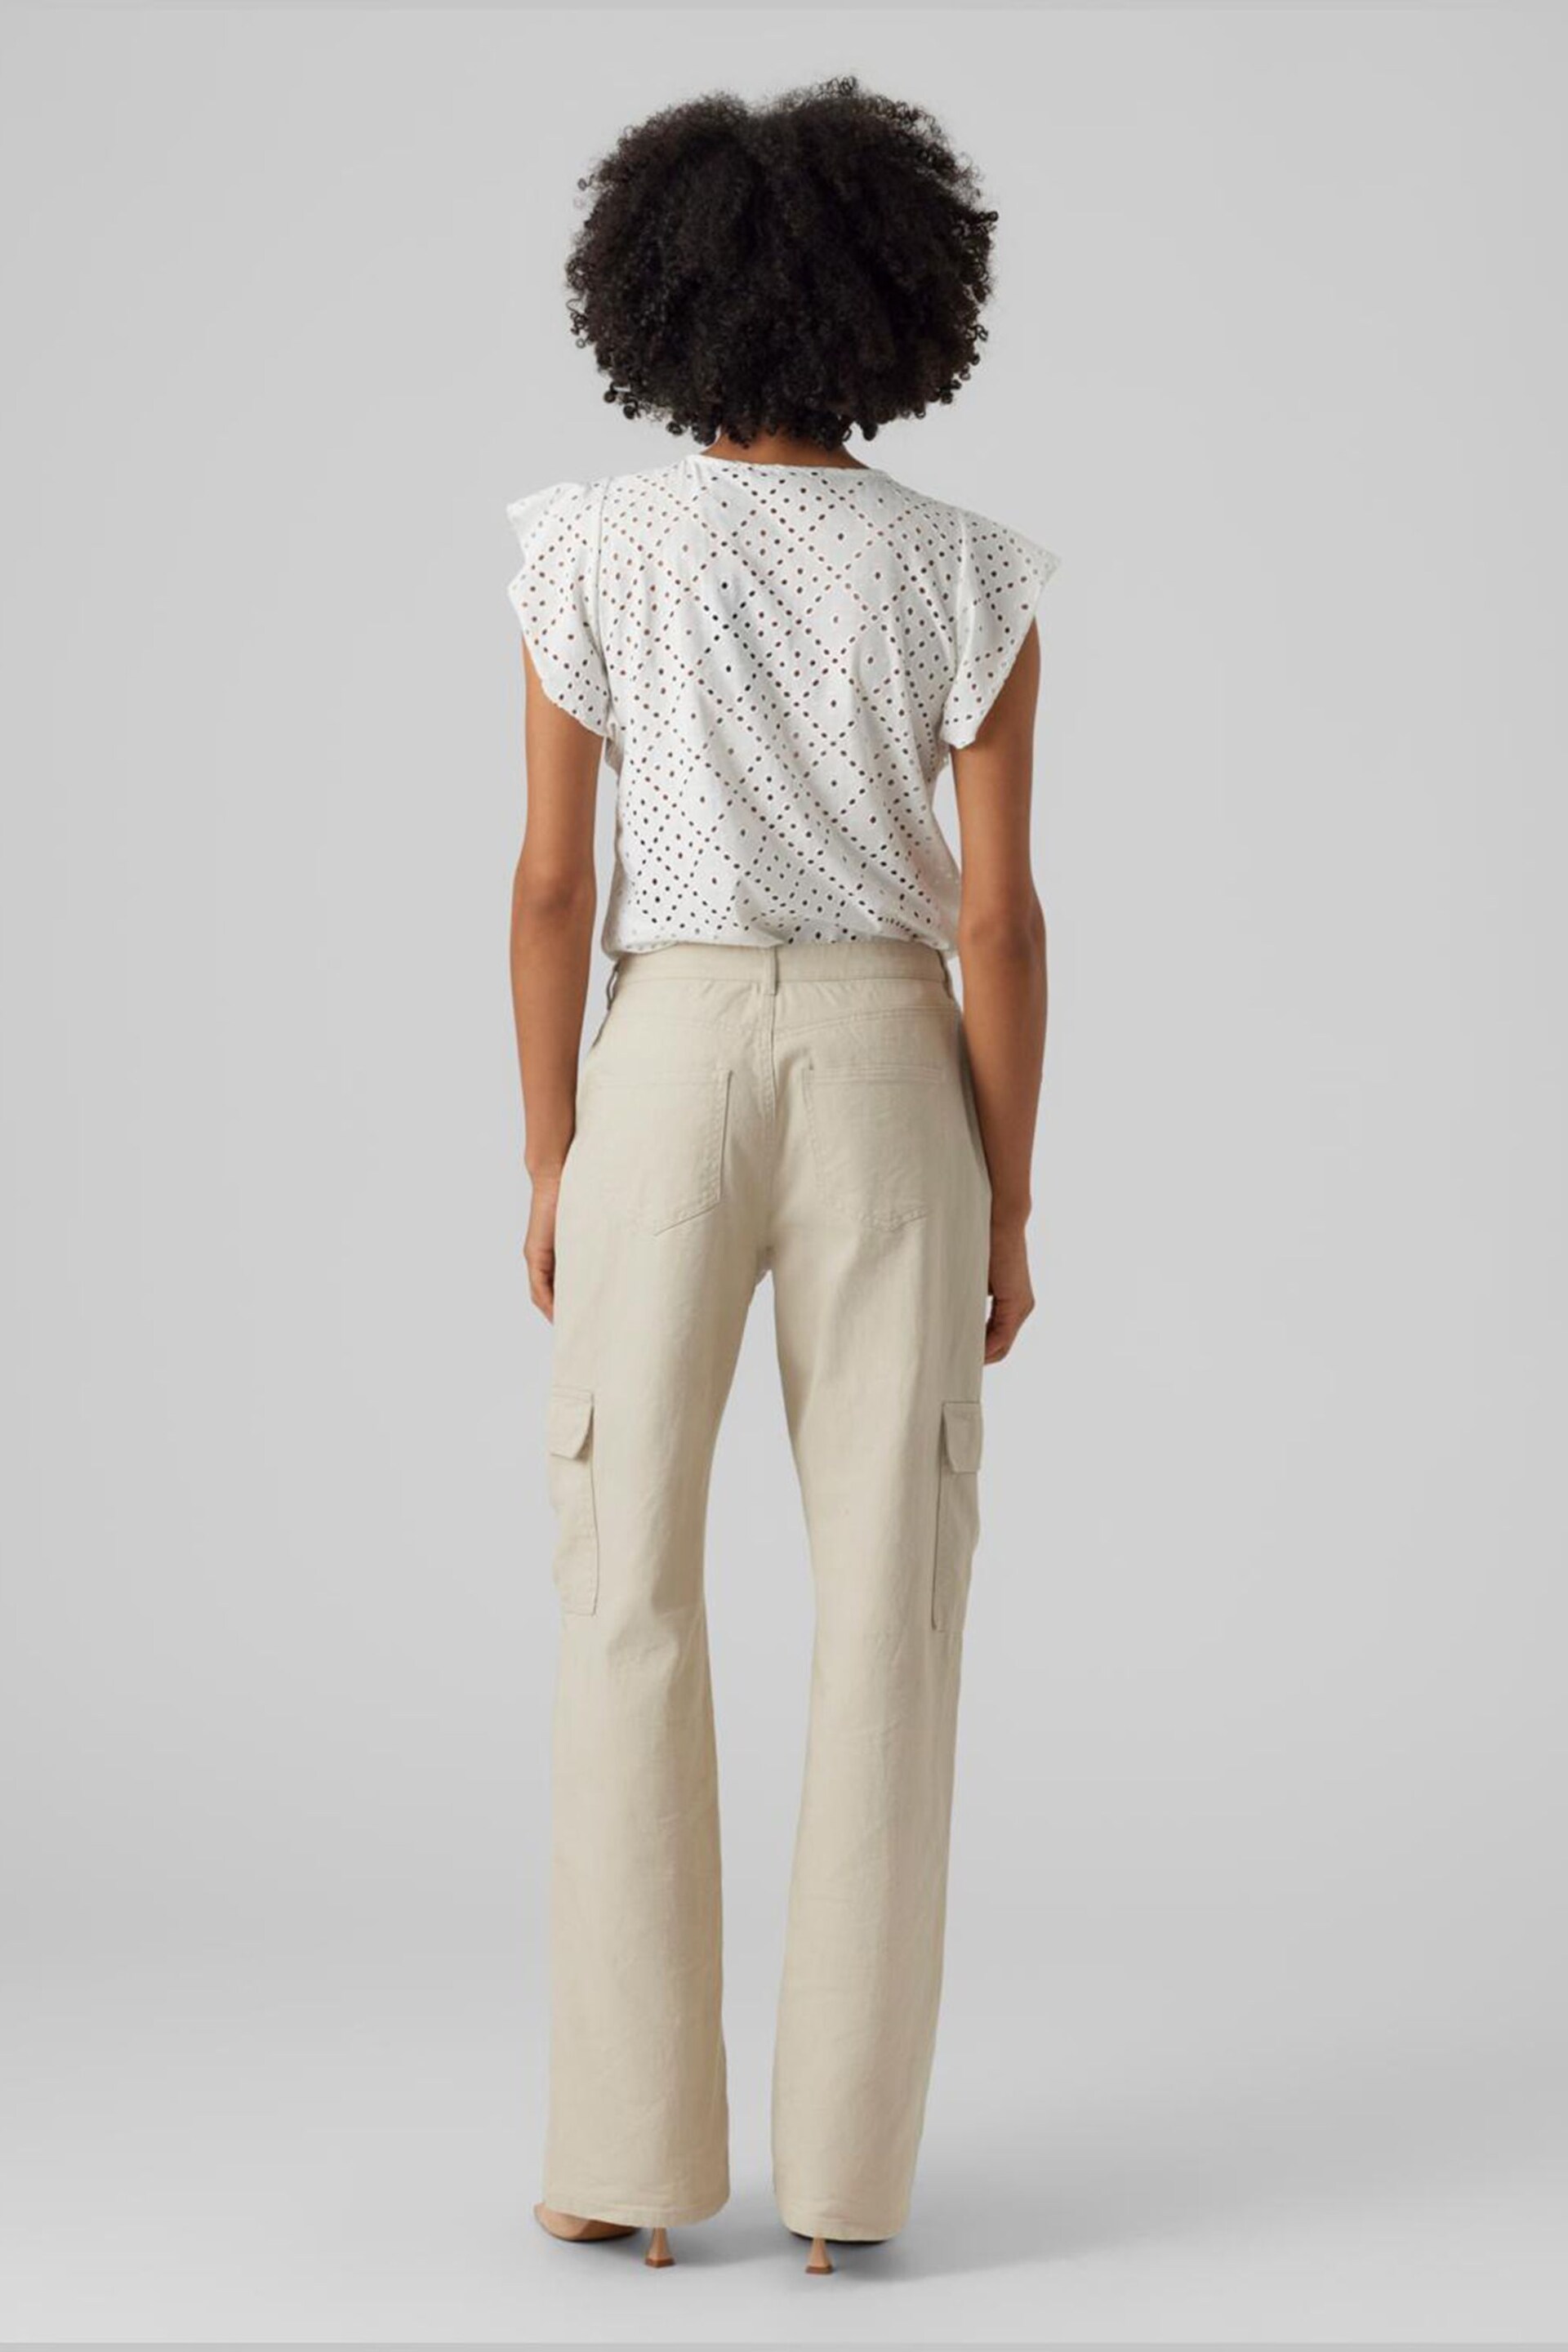 VERO MODA White Frilled Sleeve Broderie Top - Image 4 of 5